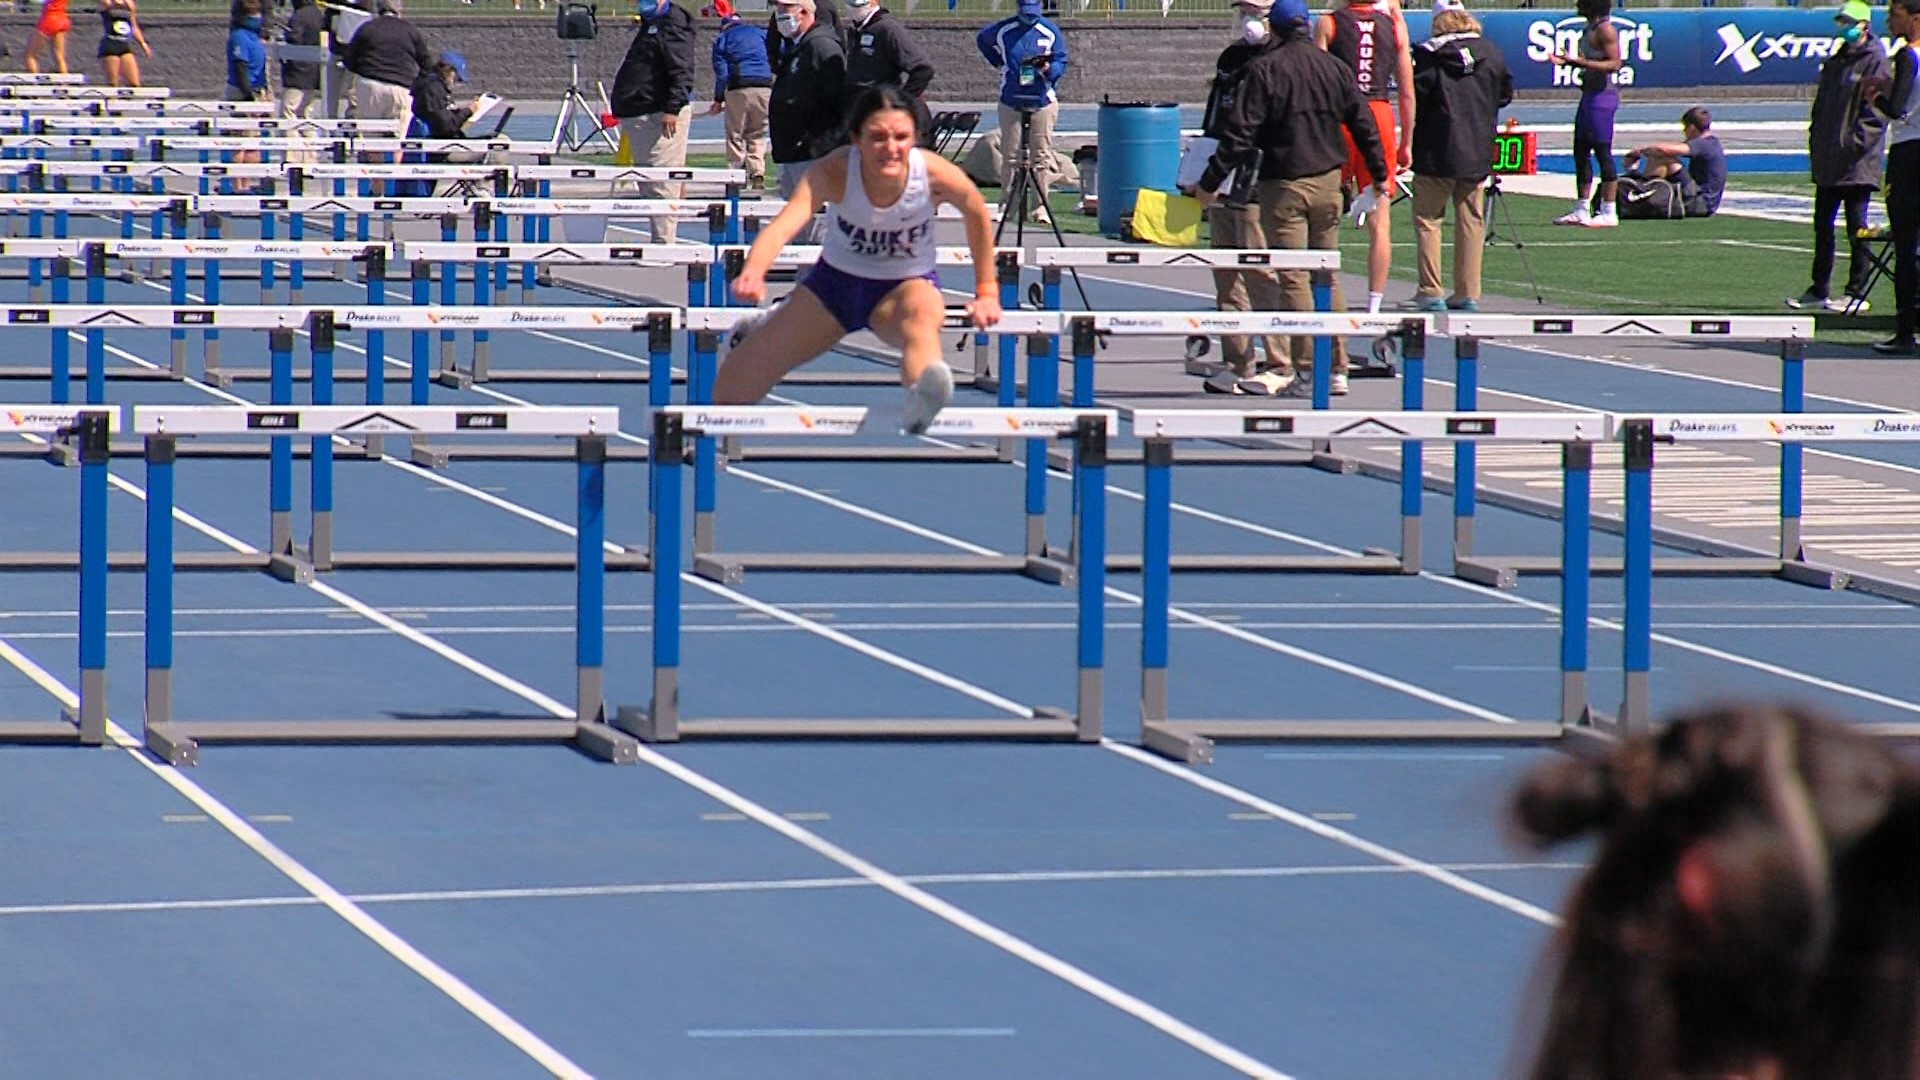 The Waukee hurdler won the triple crown at the Drake Relays and looks to carry that success over to state next week